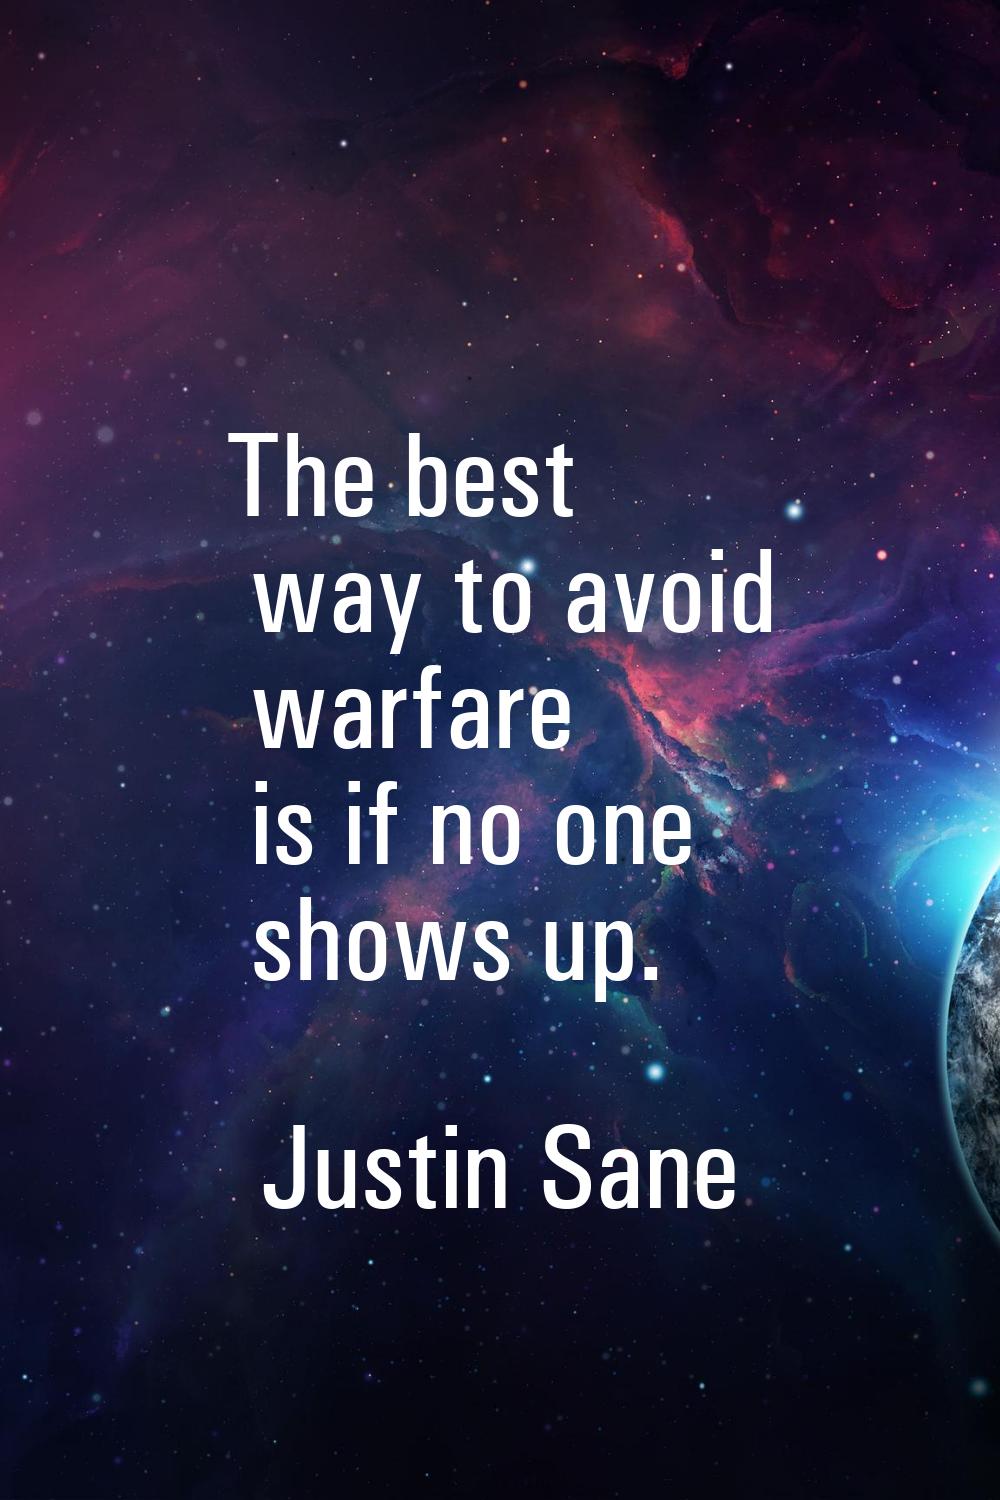 The best way to avoid warfare is if no one shows up.